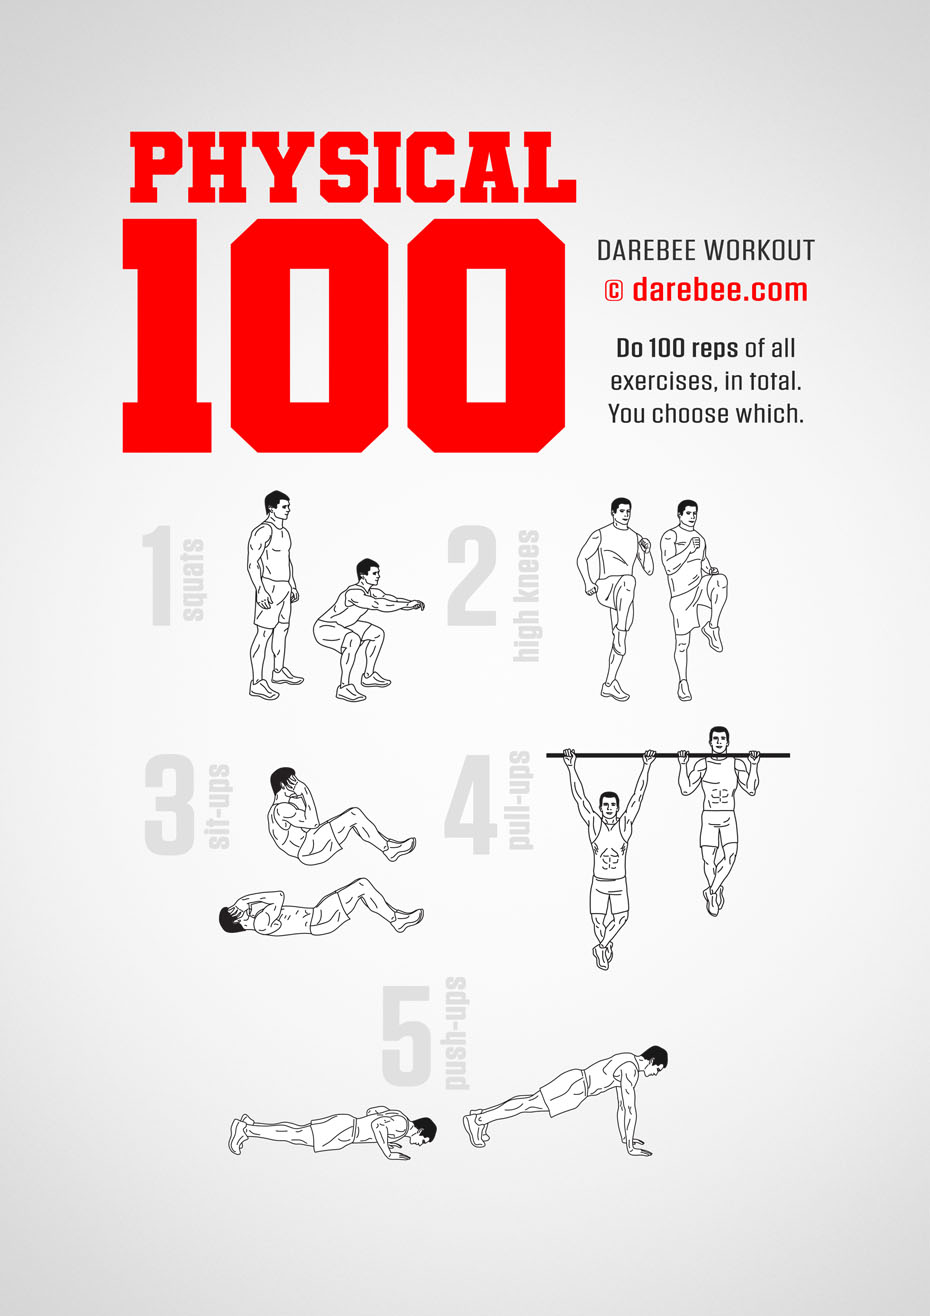 Darebee home-fitness Physical 100 is a 100-rep physical workout for total body strength. 